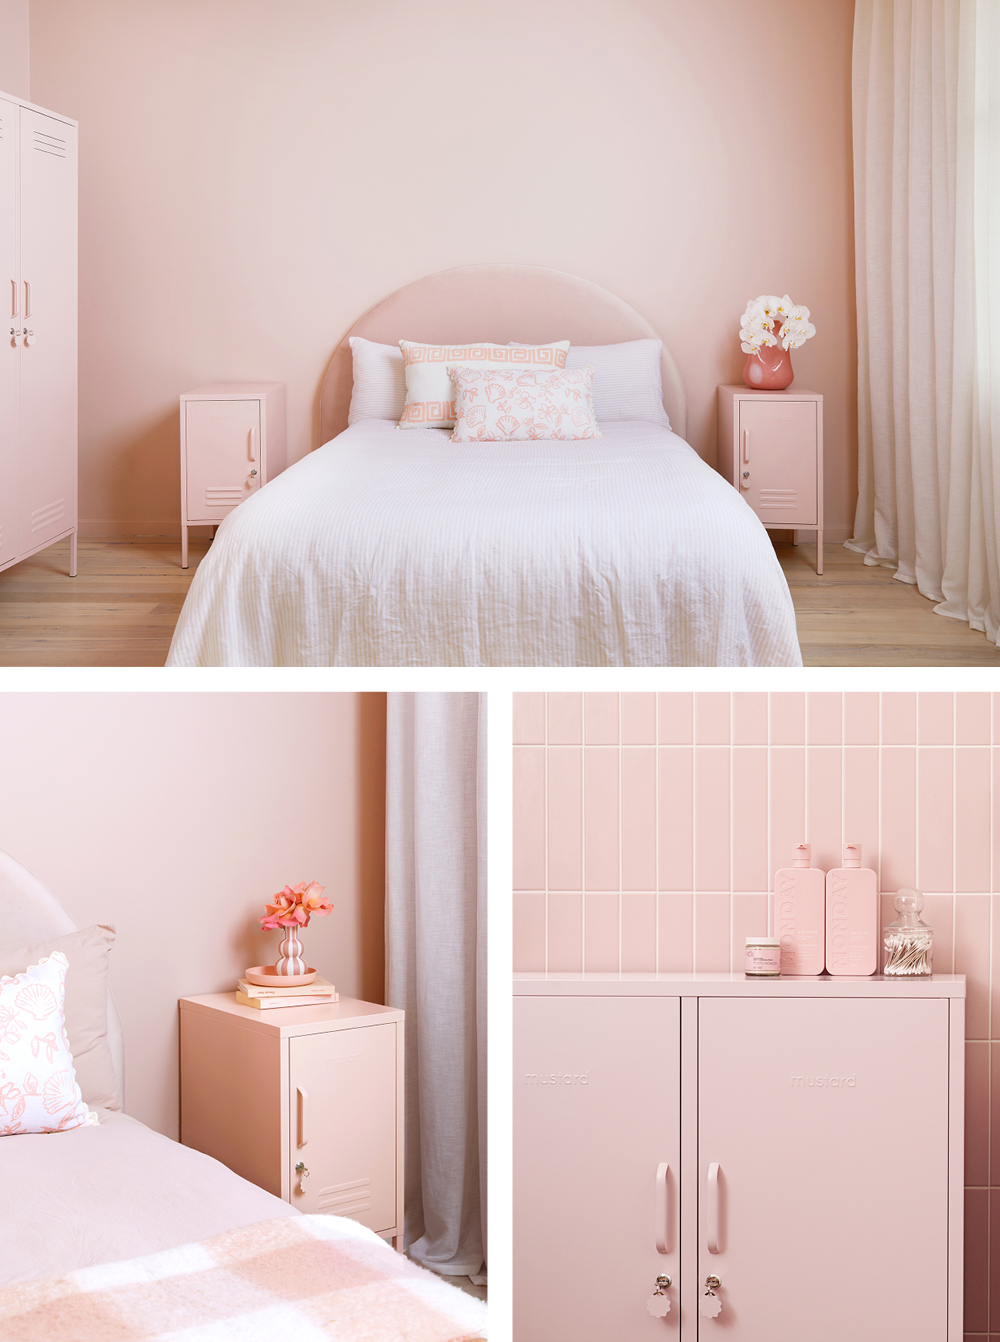 A collage of images showing soft Blush pink lockers with matching linen, furnishings and wall colour.